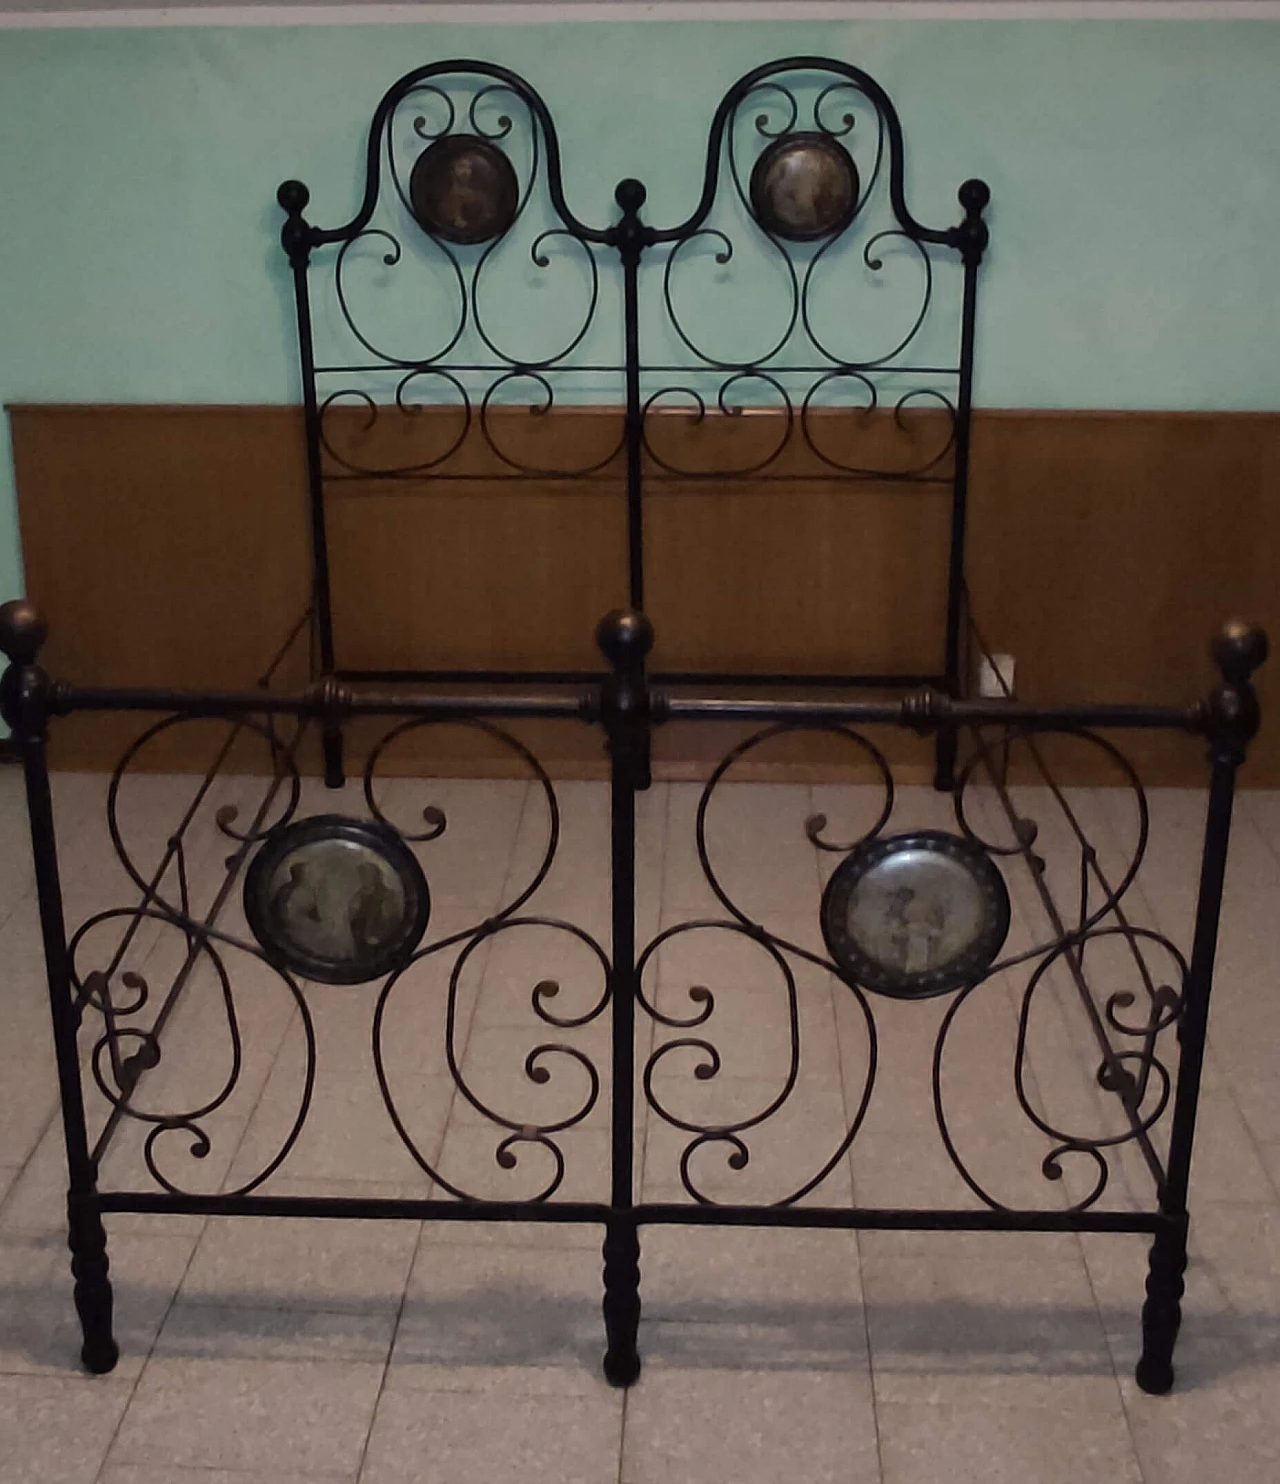 Wrought iron bed with hand-painted rosettes, mid-19th century 1368485